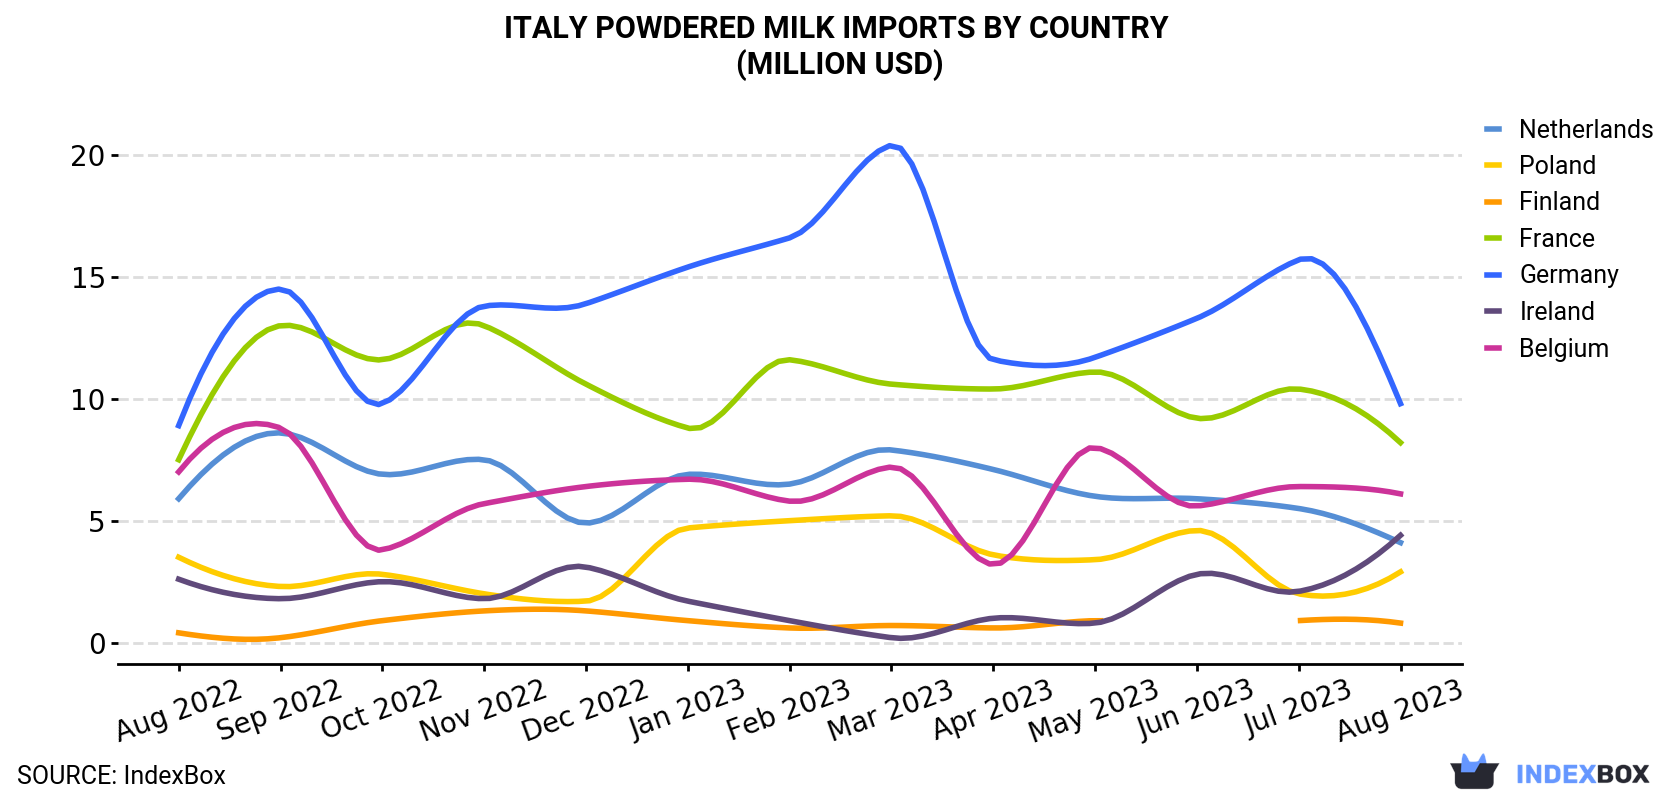 Italy Powdered Milk Imports By Country (Million USD)